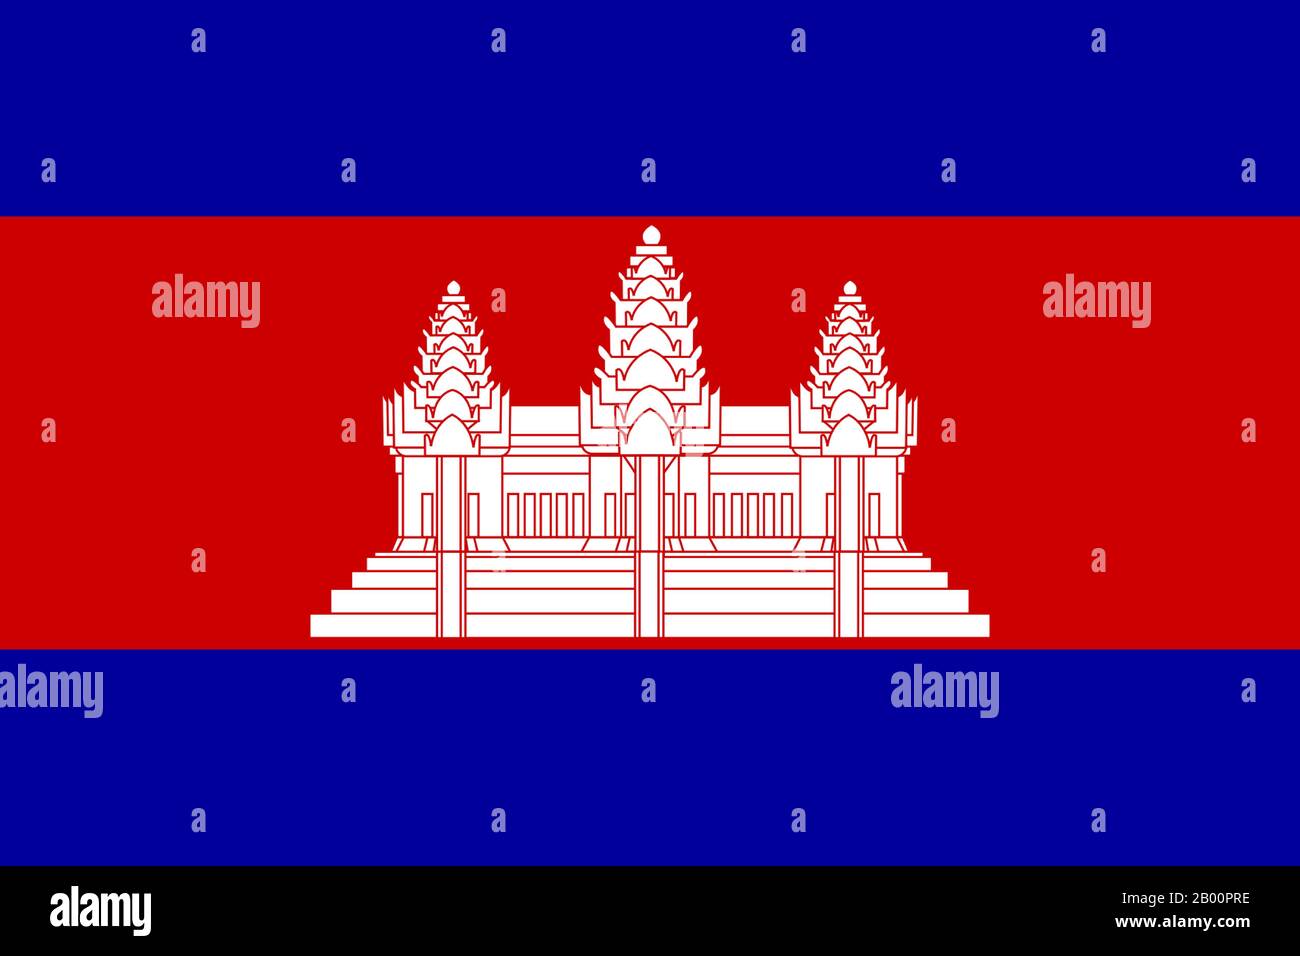 Cambodia: Flag of the Kingdom of Cambodia, 1948-1970, 1993 to the present. Three white towers of Angkor Wat against a red field, with dark blue band top and bottom. Stock Photo